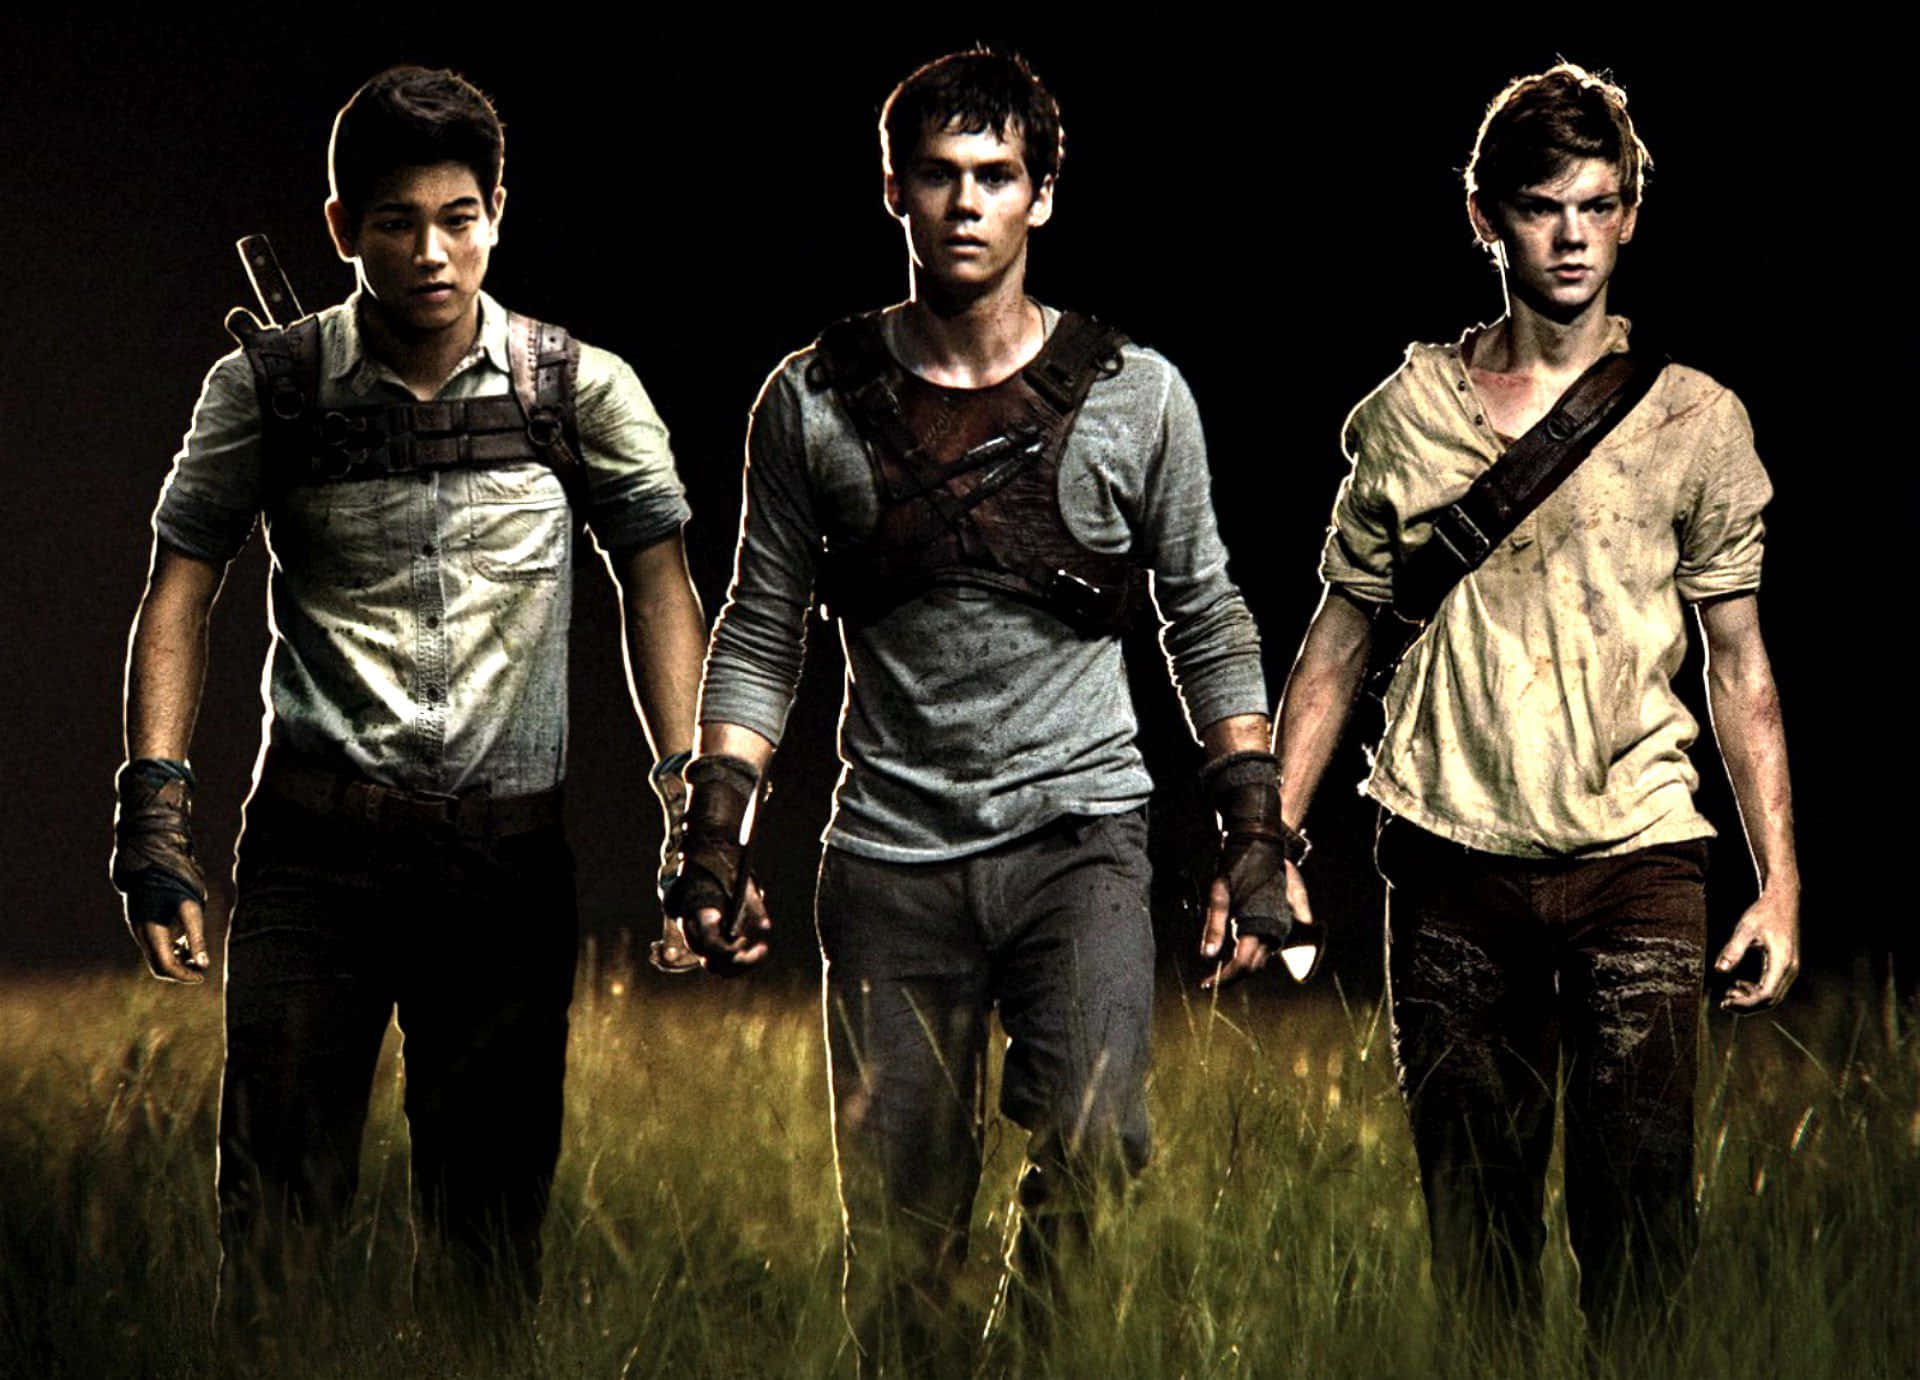 Thomas and fellow Gladers facing the challenges of the Maze